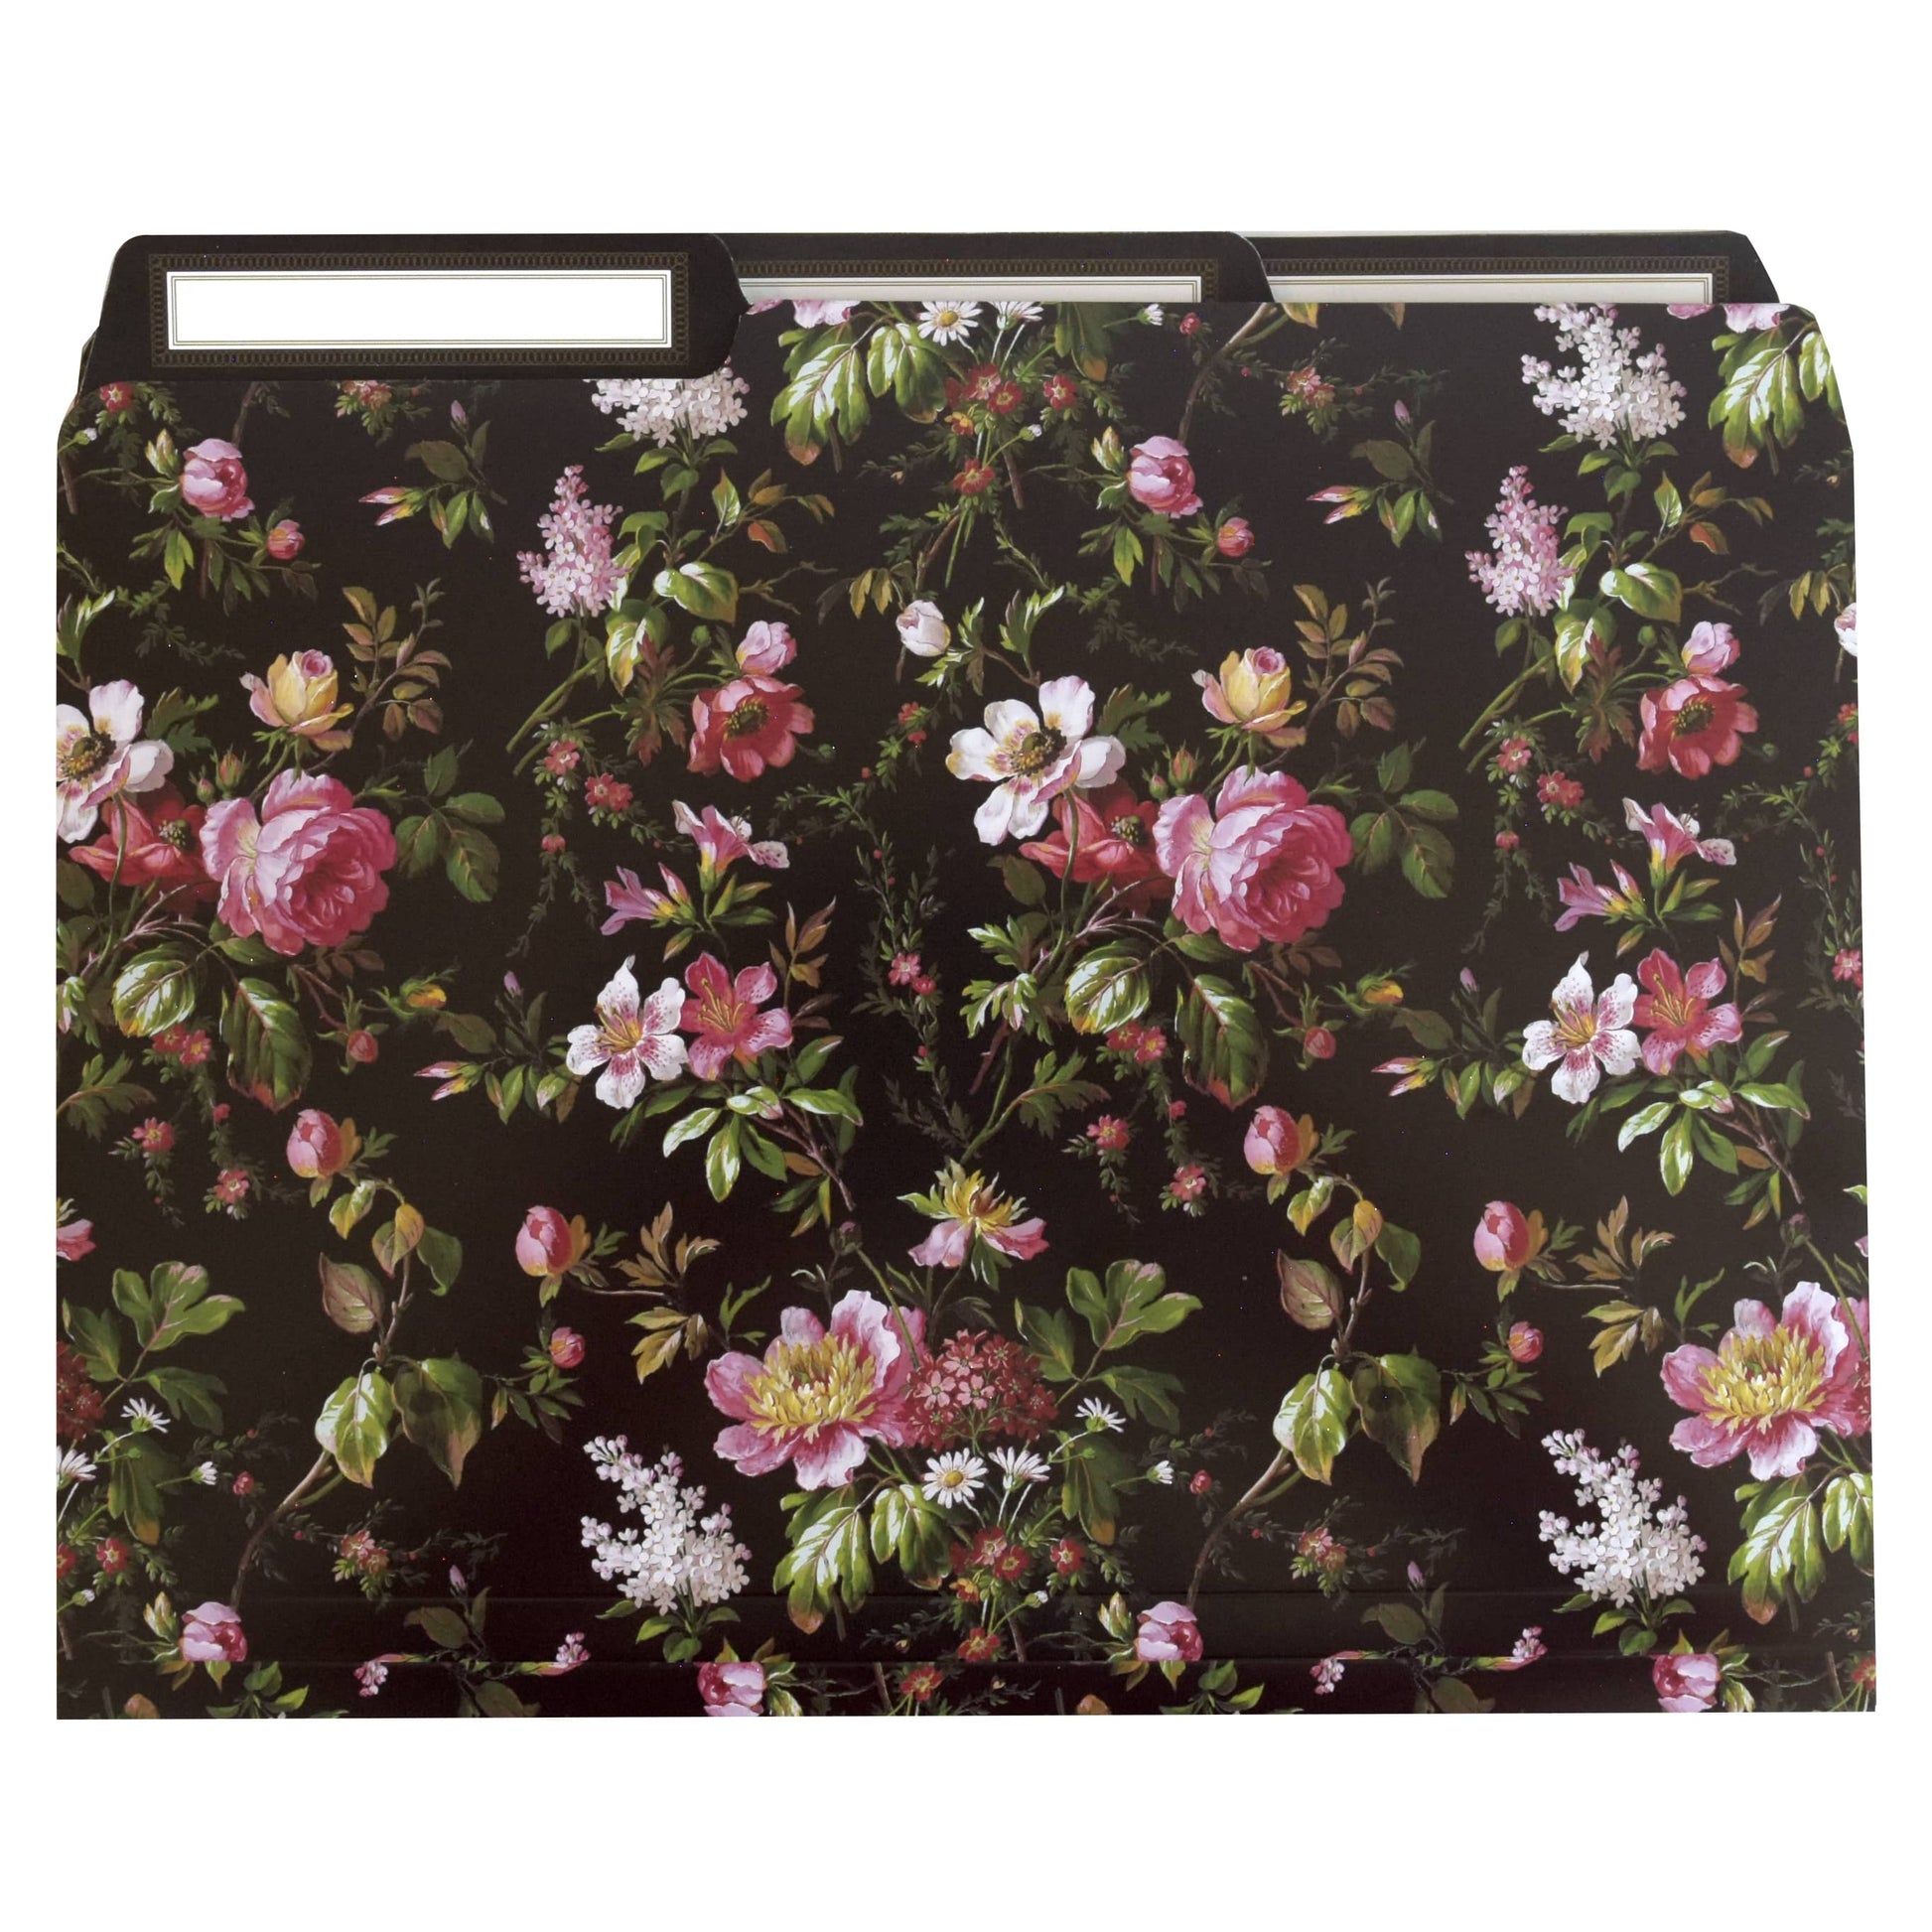 a black floral wallpaper with pink and white flowers.